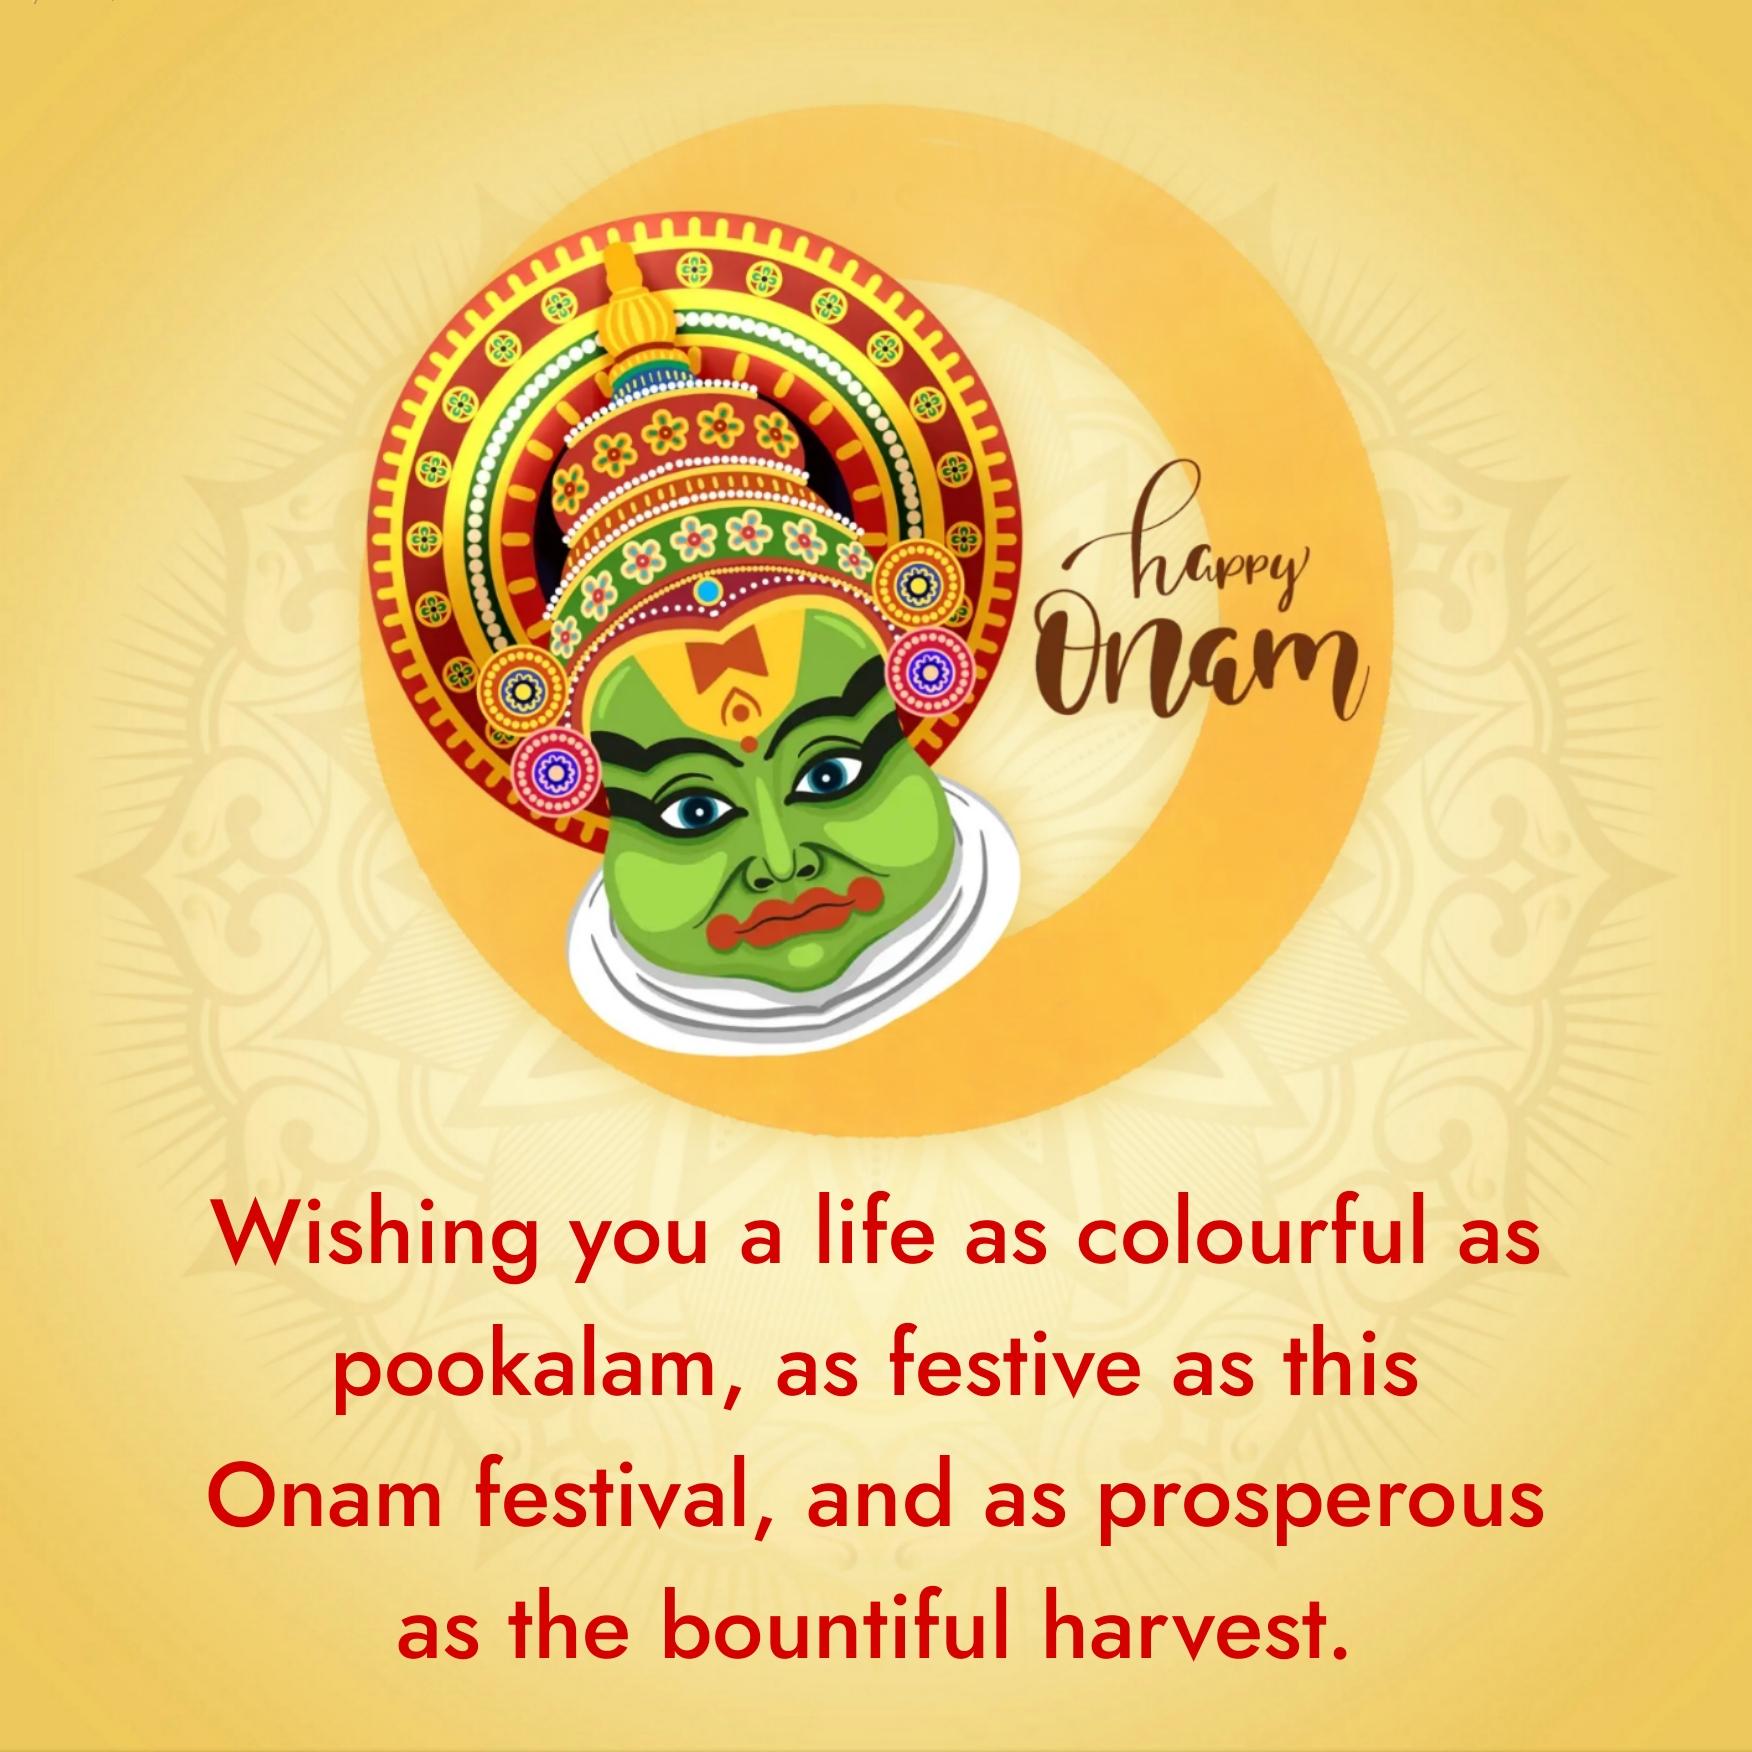 Wishing you a life as colourful as pookalam as festive as this Onam